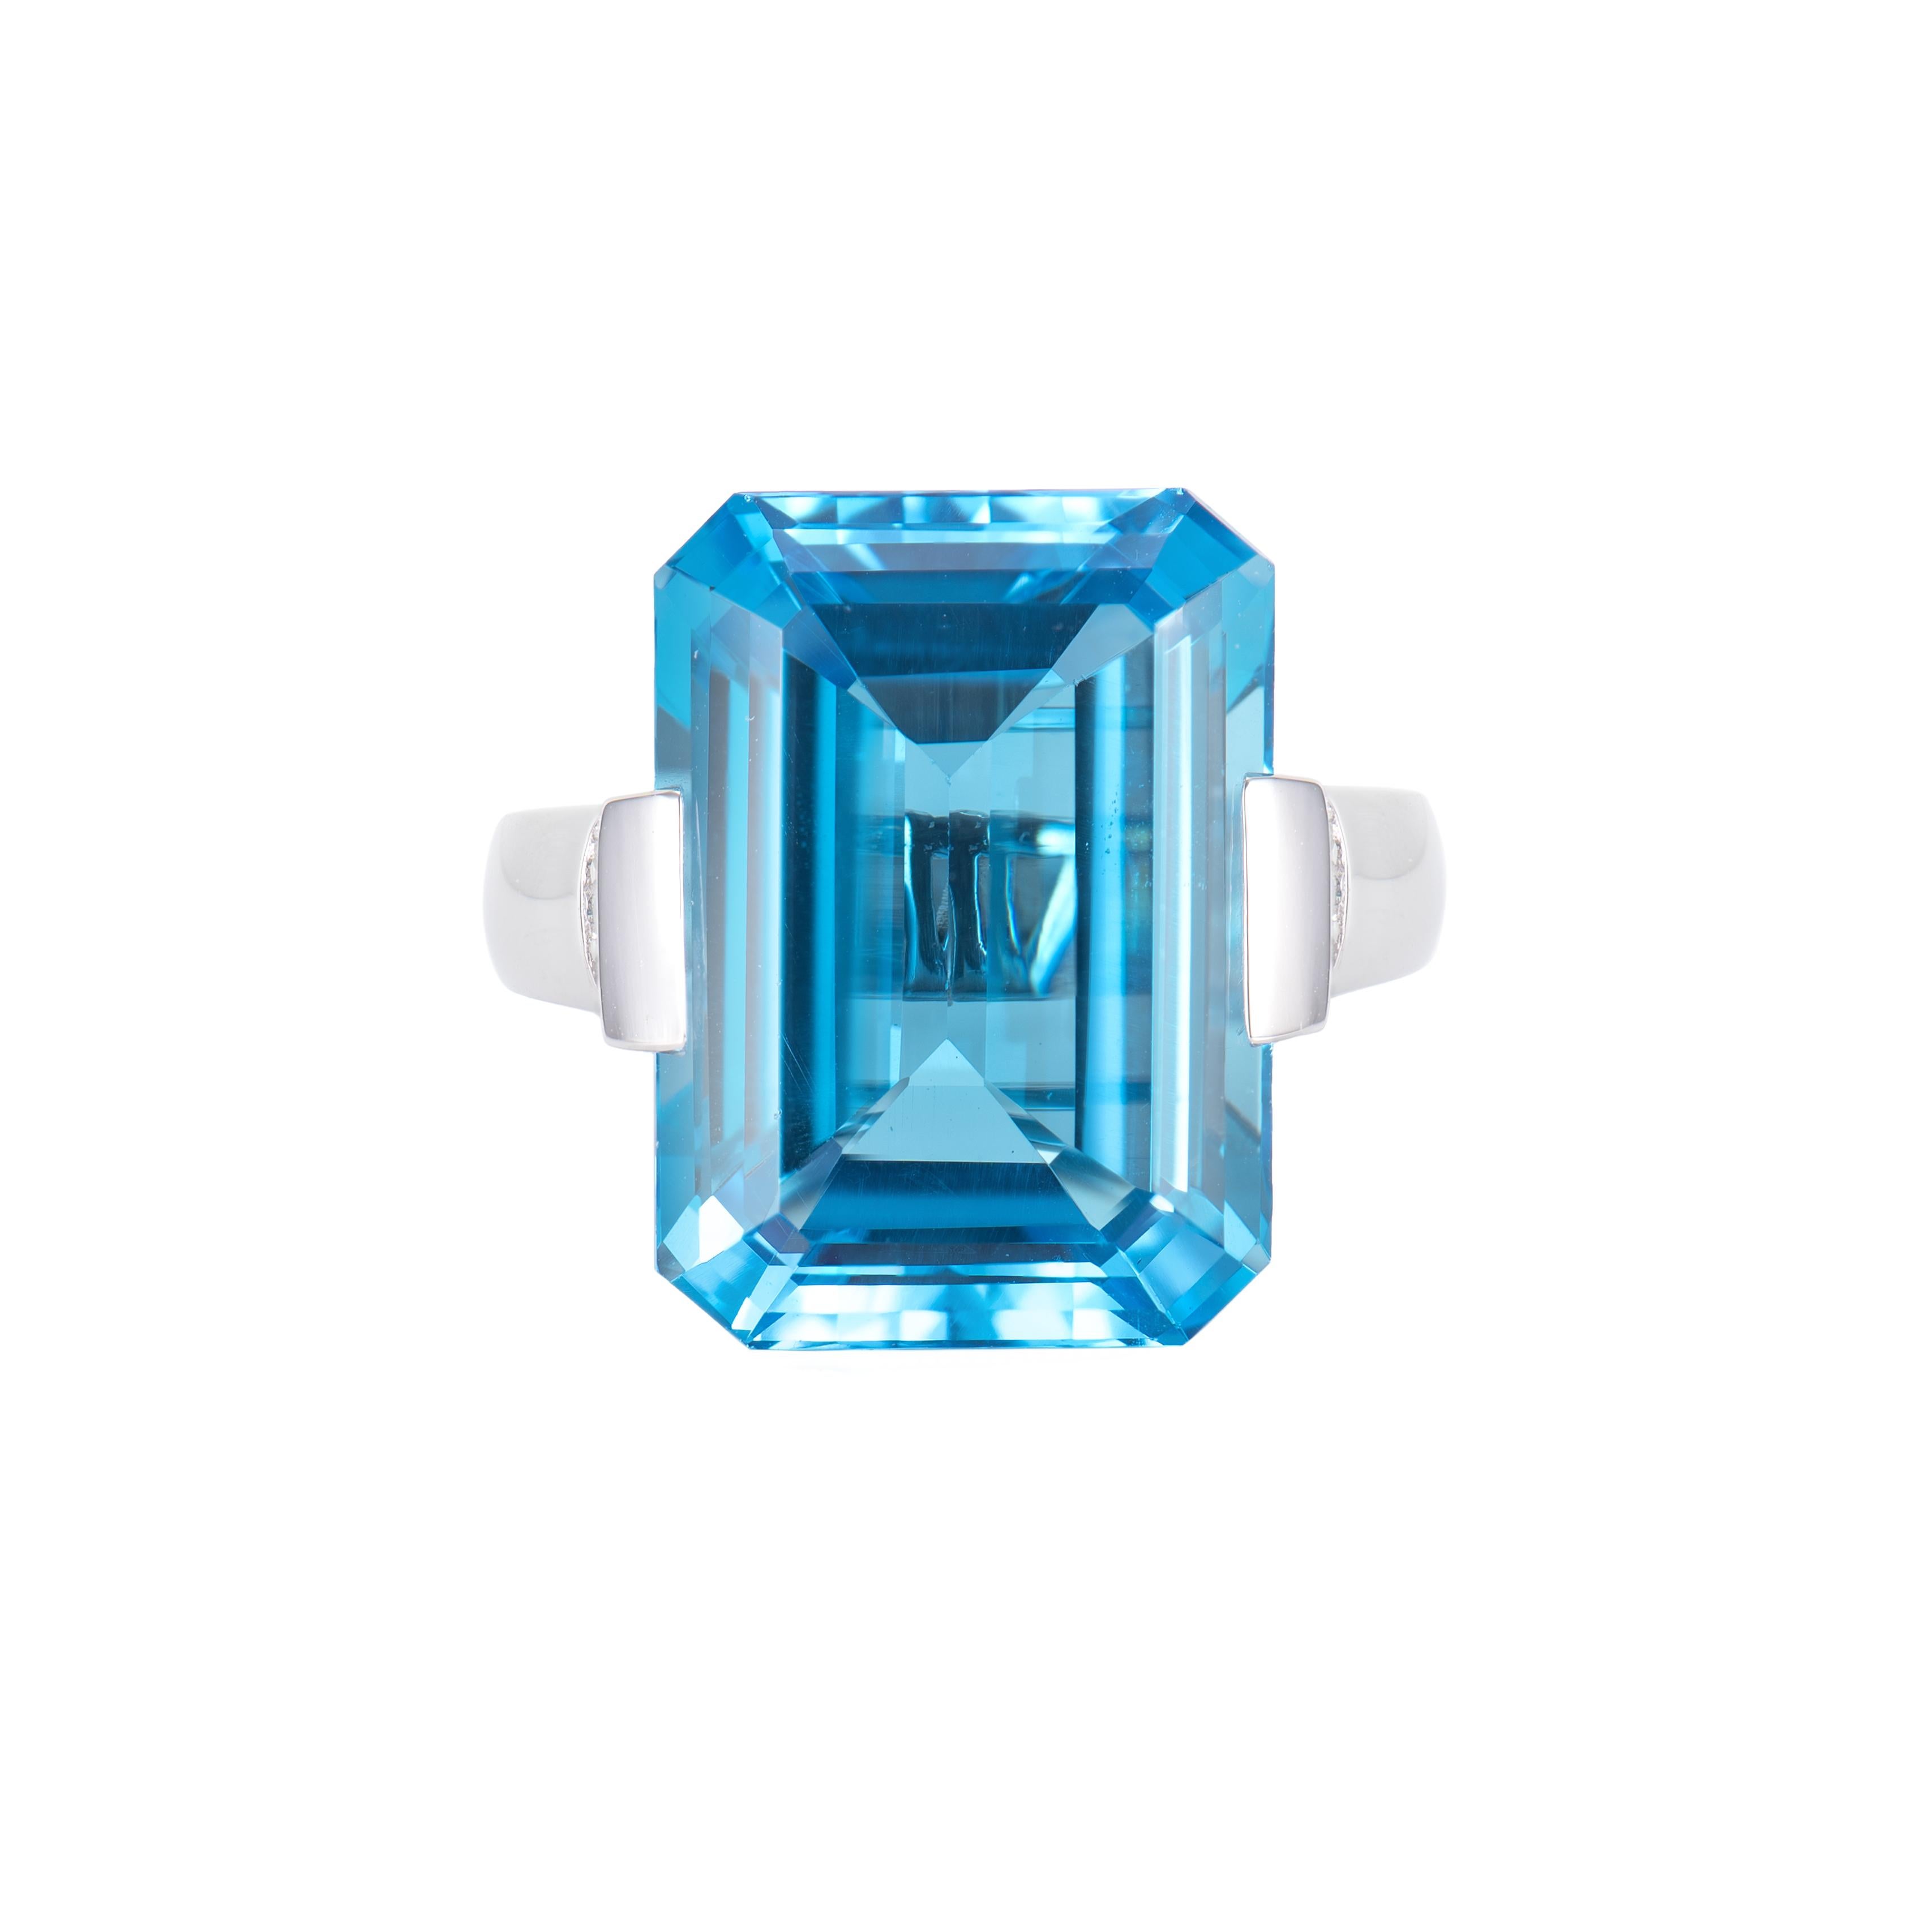 Contemporary 20.86 Carat Swiss Blue Topaz Fancy Ring in 18K White Gold with White Diamond. For Sale